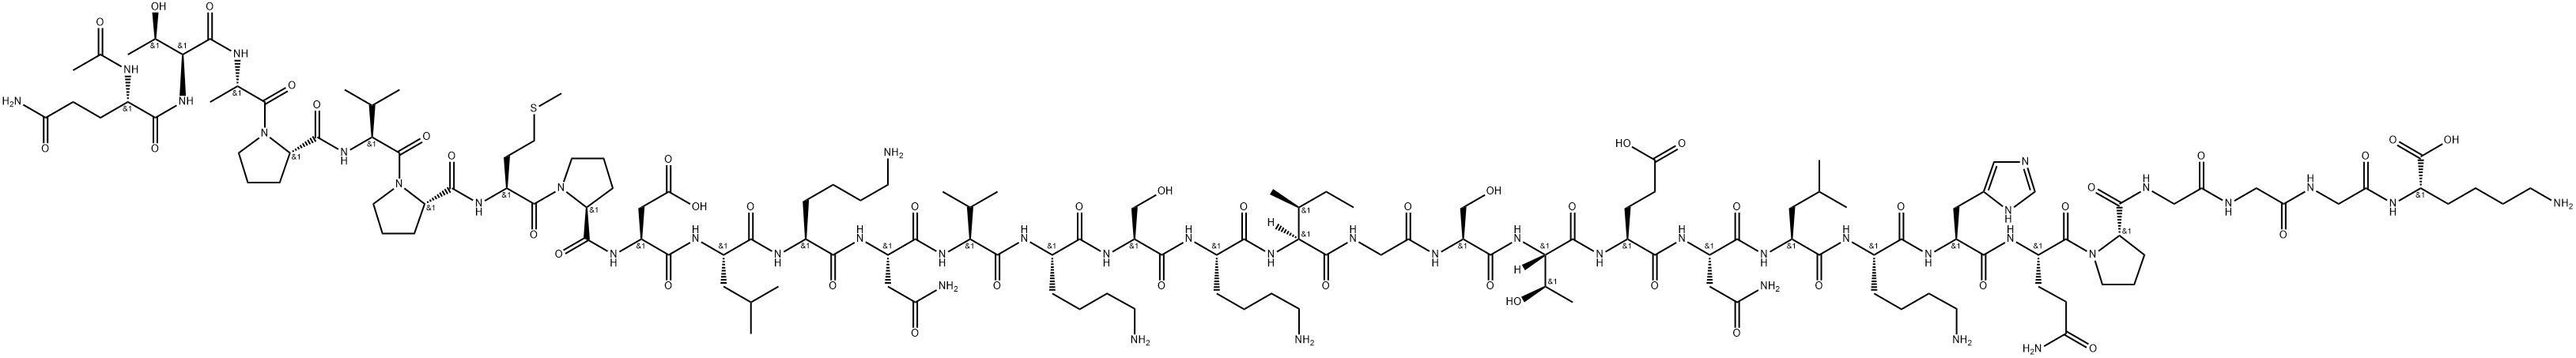 Acetyl-Tau Peptide (244-274) (Repeat 1 Domain) Structure